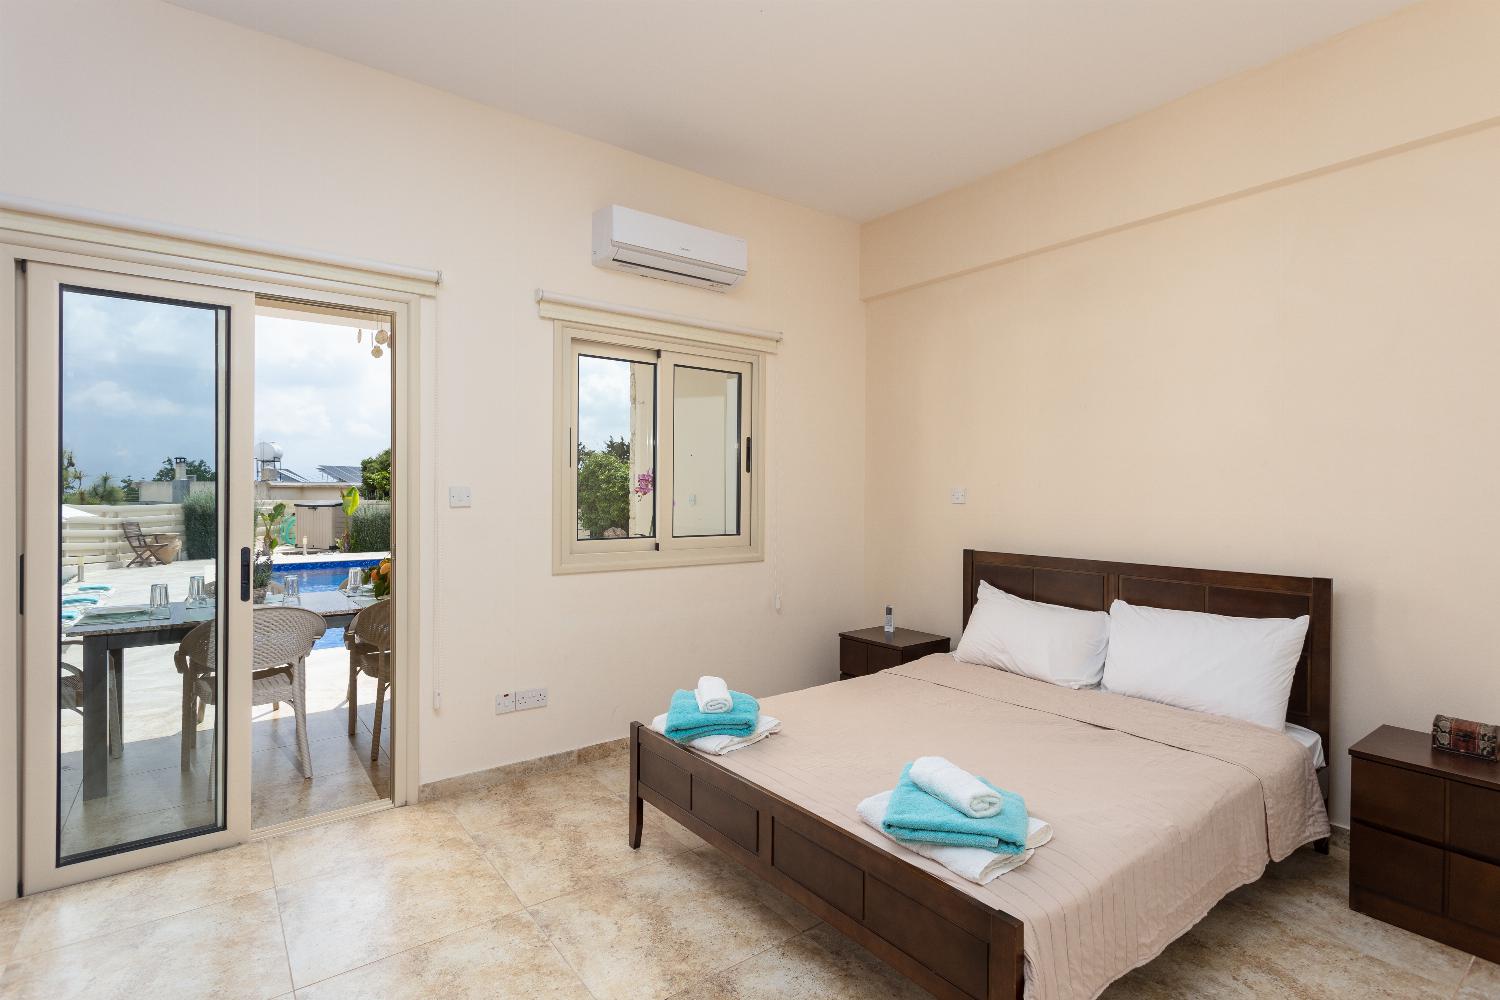 Double bedroom with A/C and terrace access